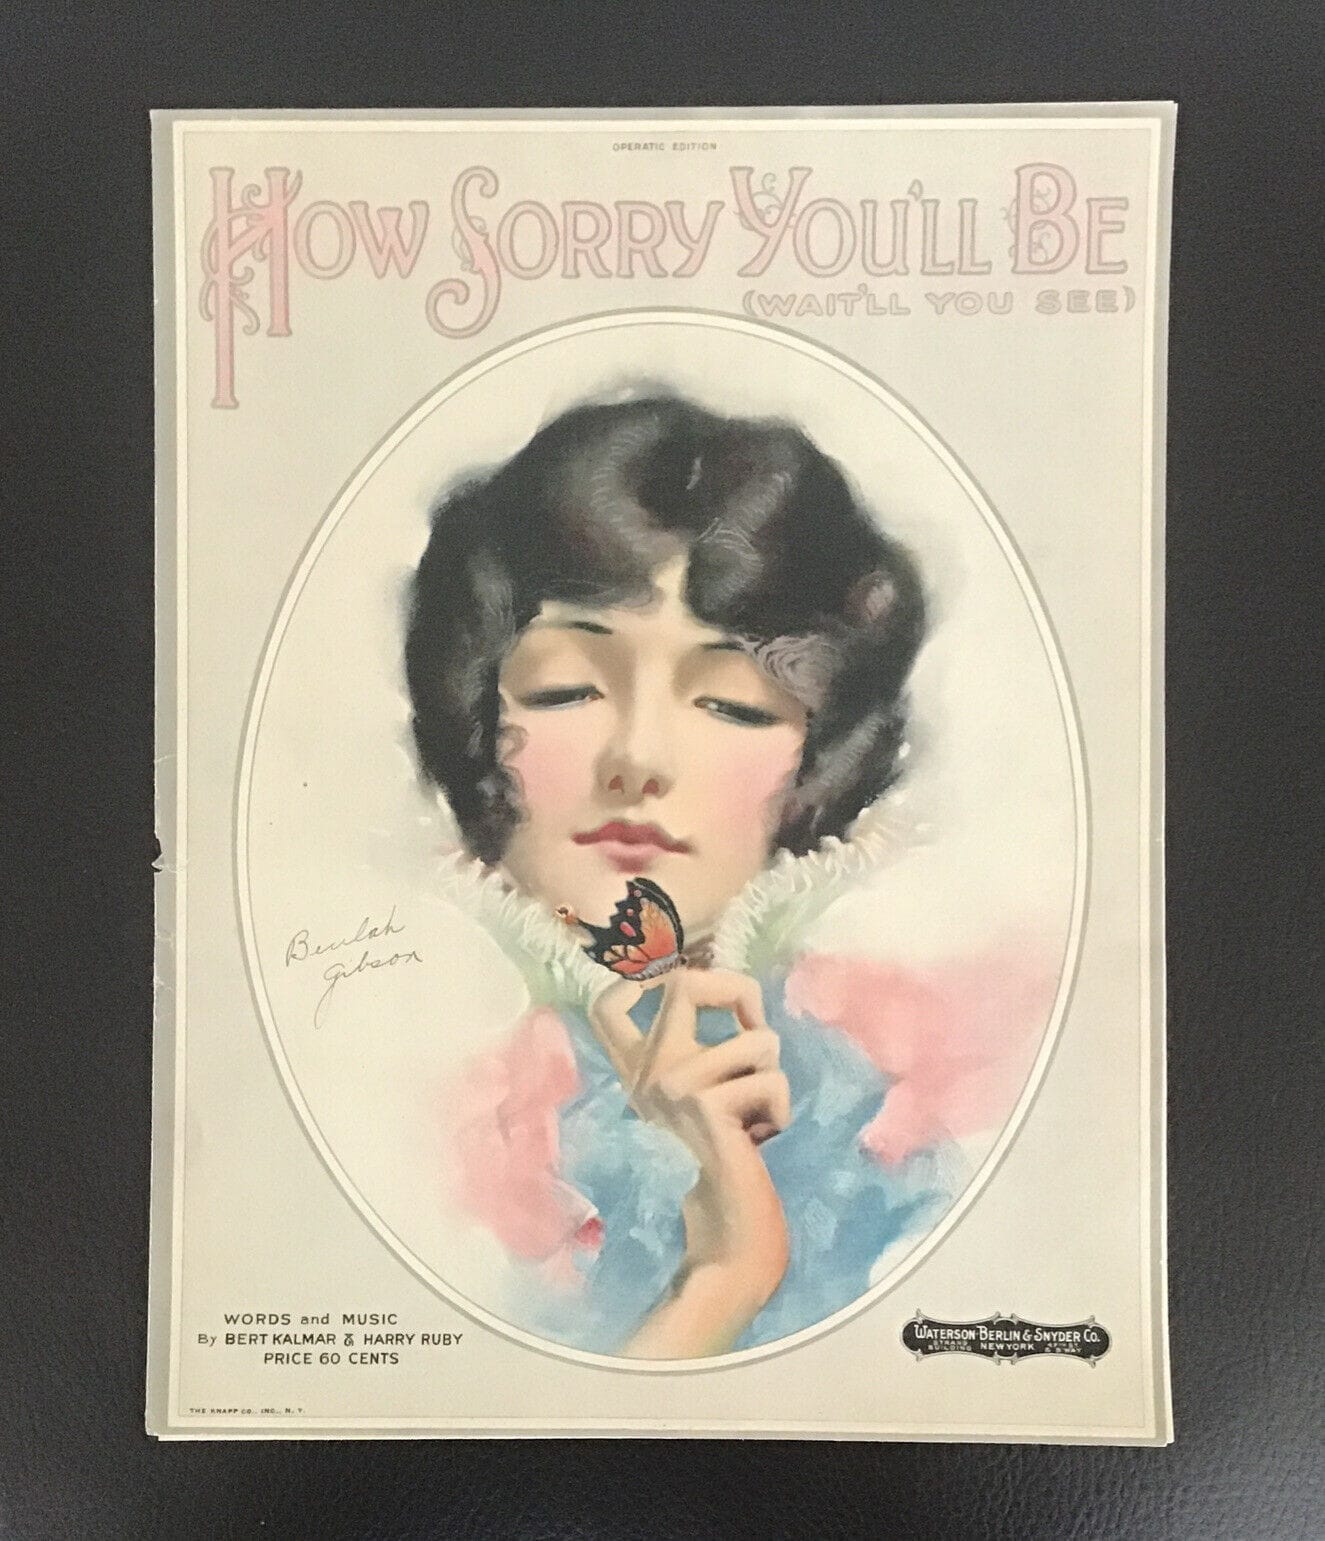 A vintage illustration on the cover of a piece of sheet music depicts a woman with bobbed hair and half-closed eyes studying a butterfly on her finger. Her expression is unreadable. 